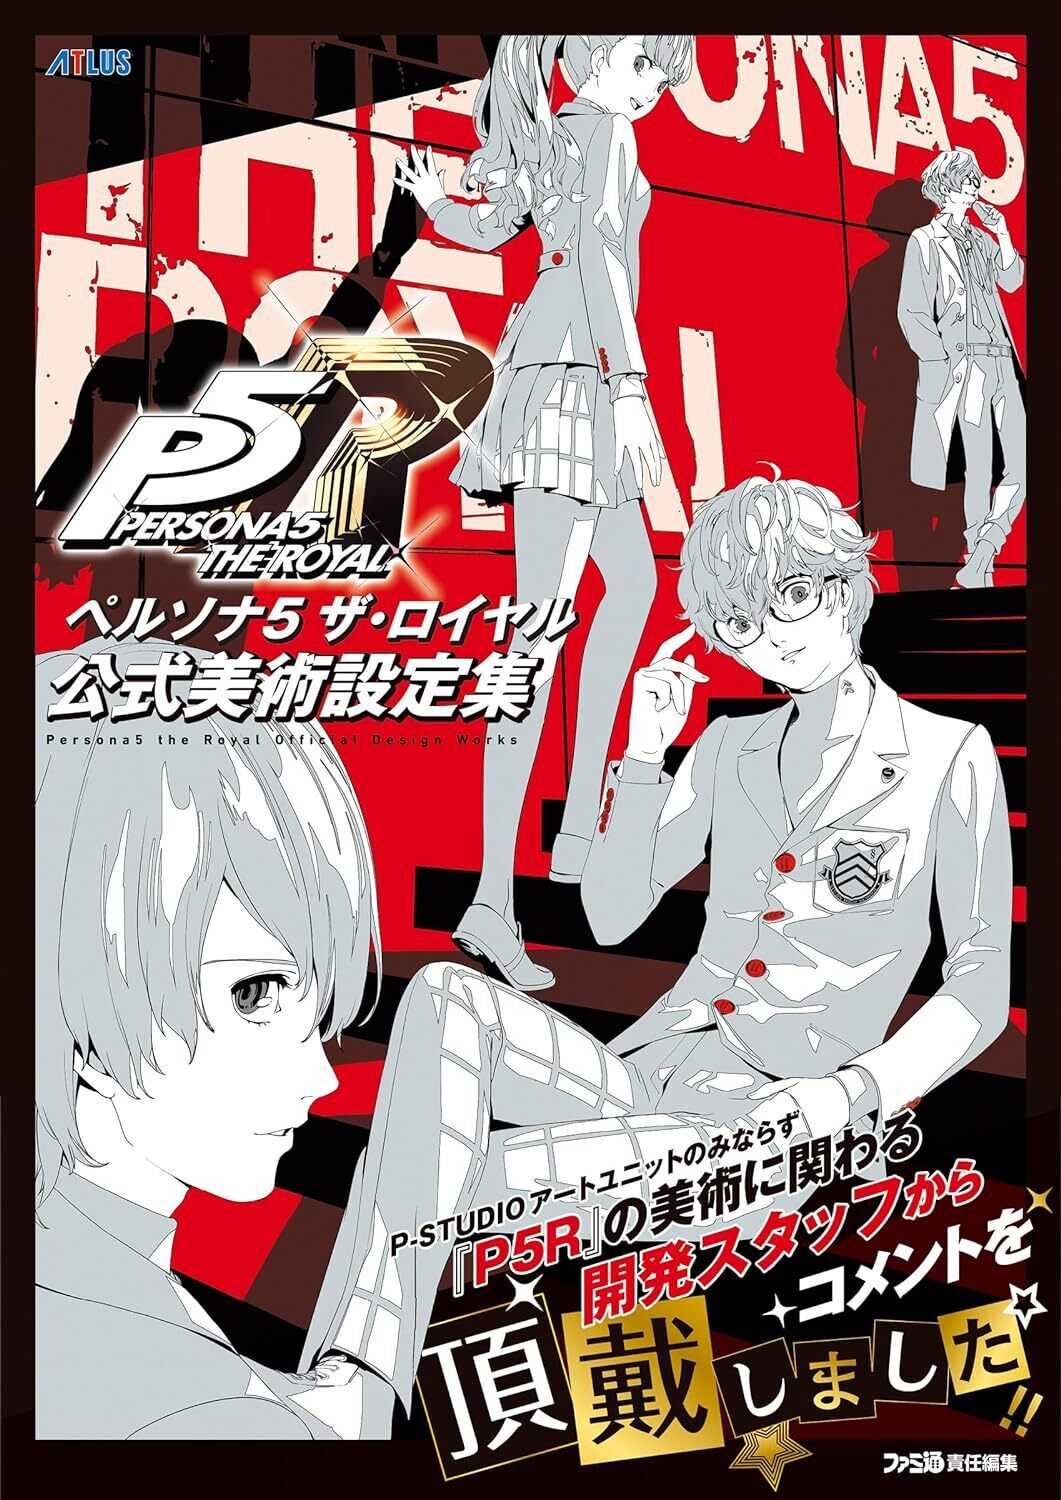 PERSONA 5 THE ROYAL OFFICIAL ART SETTING COLLECTION